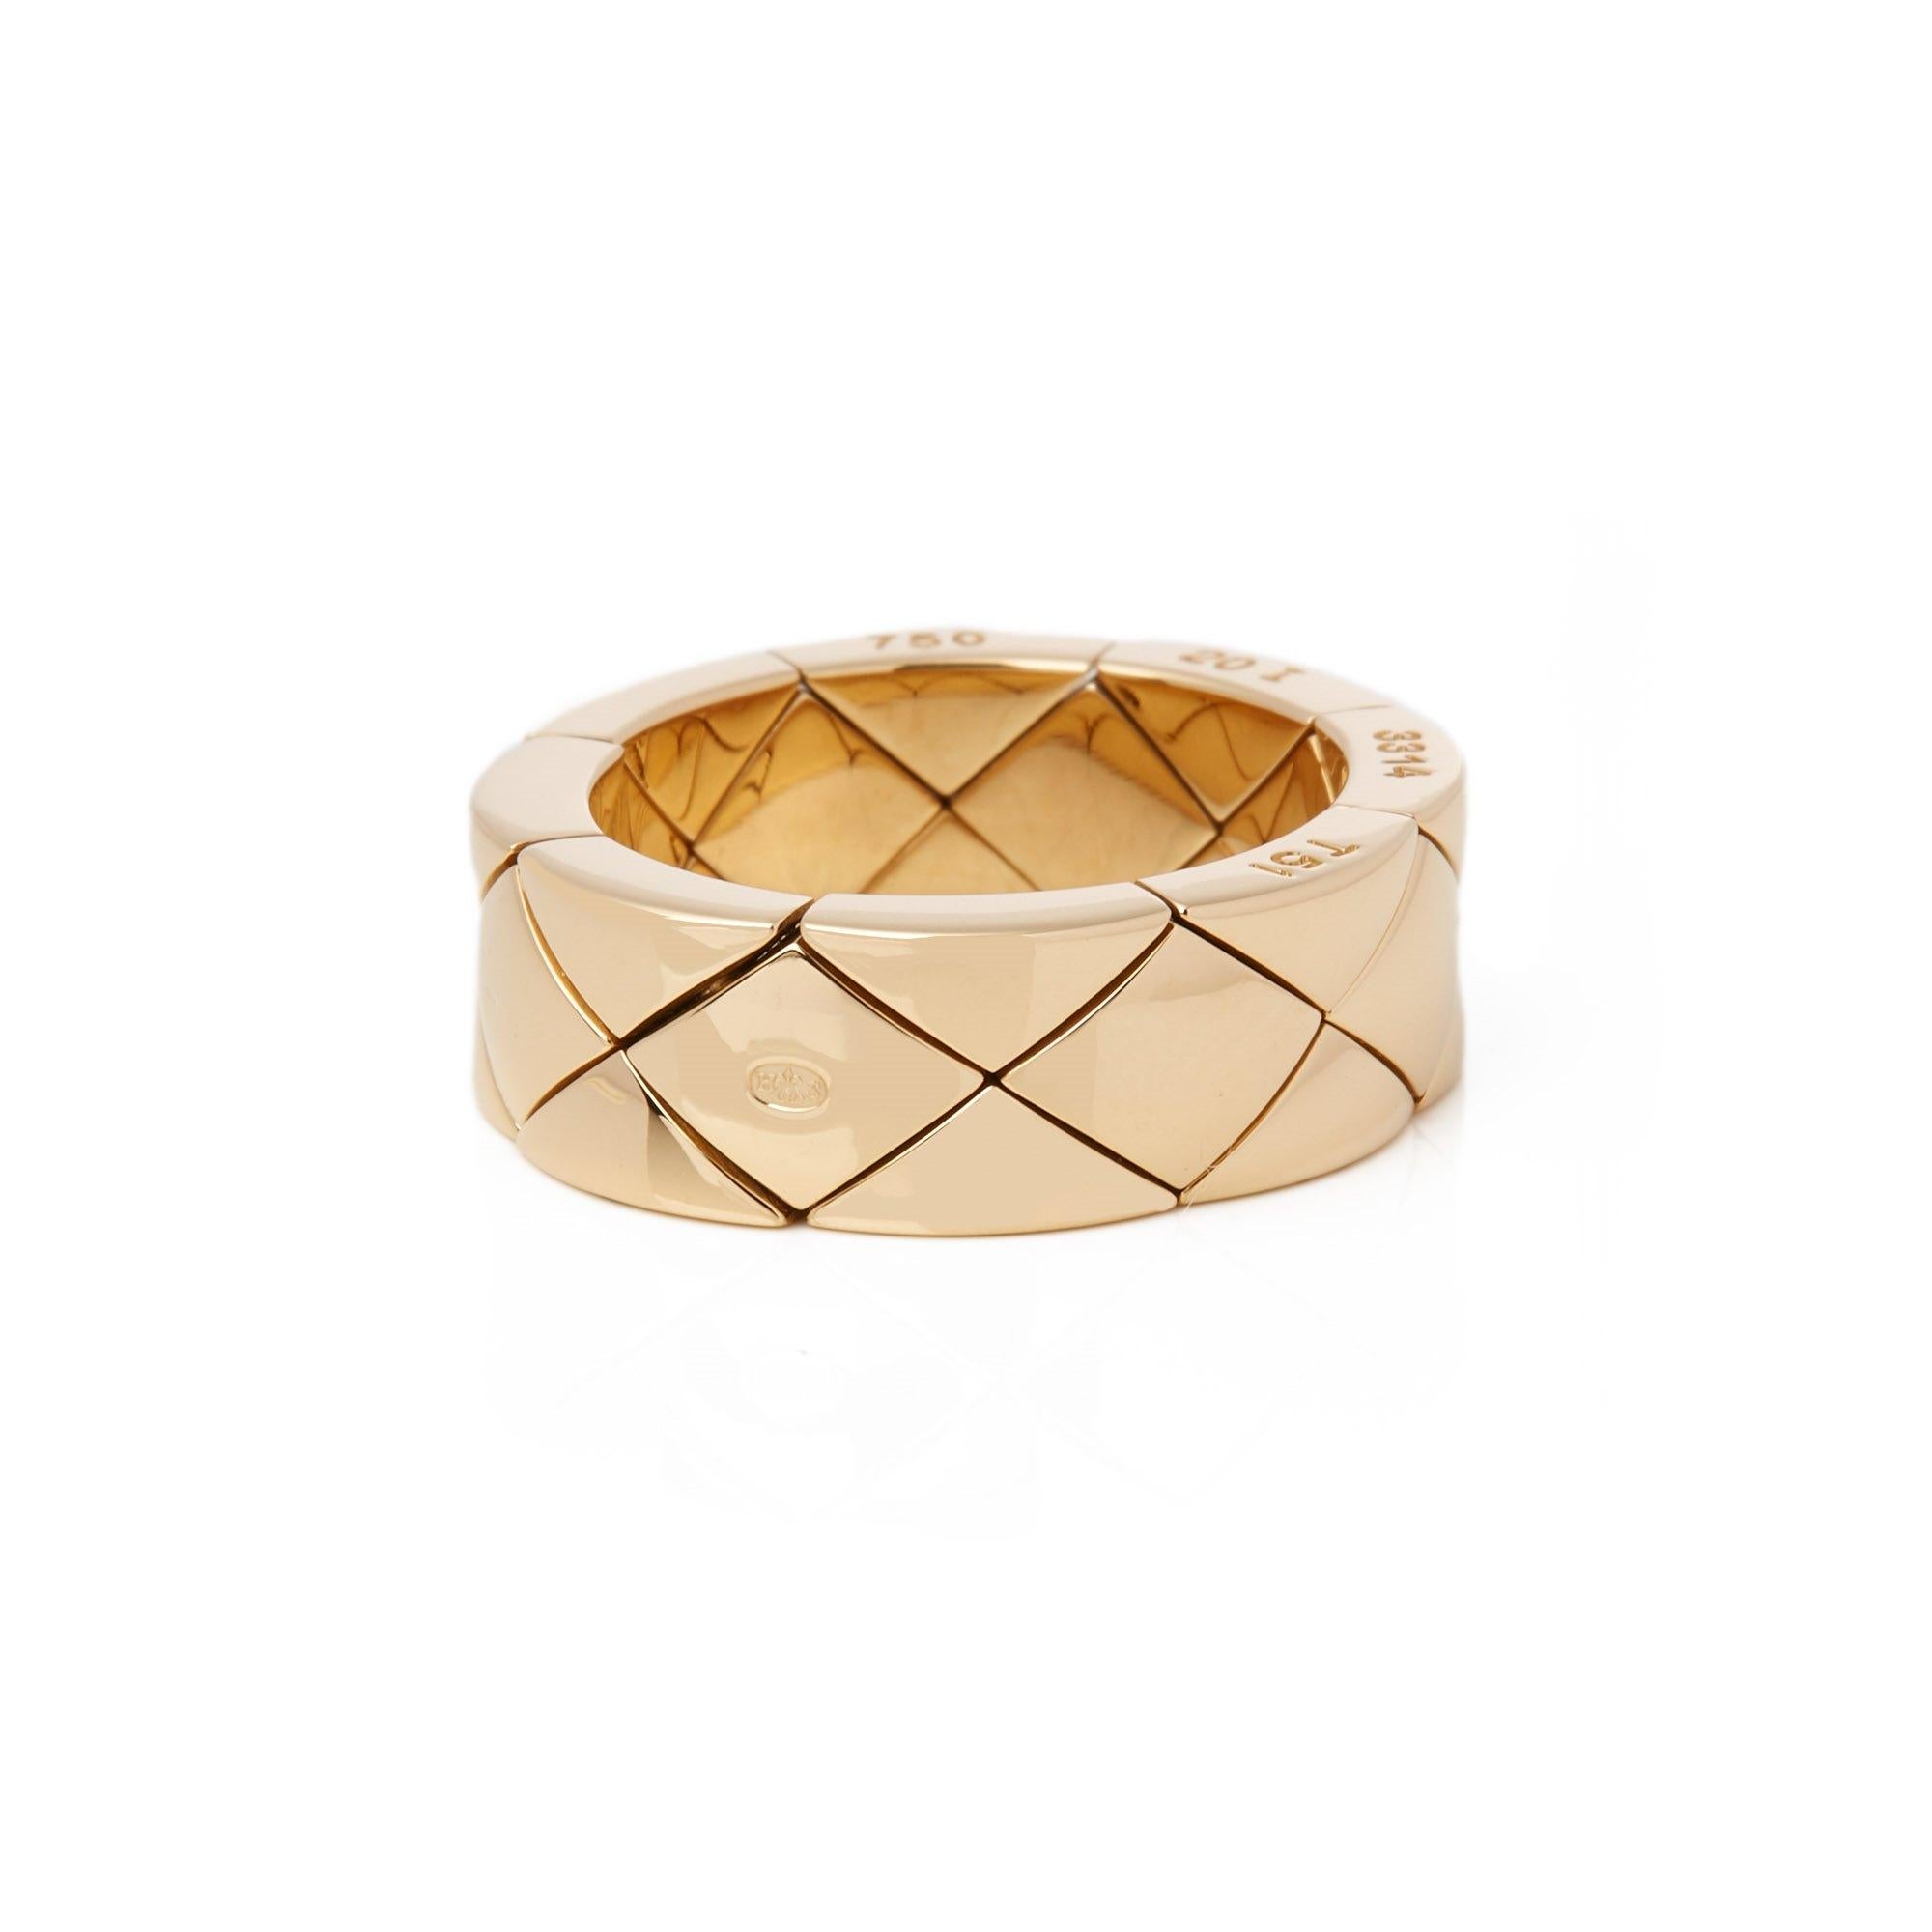 This Ring by Chanel is from their Coco Crush Collection and features moveable Sections in 18k Yellow Gold. The ring is UK size L 1/2, EU 52, USA size 6. Complete with Xupes Presentation Box. Our Xupes reference is COMJ234 should you need to quote